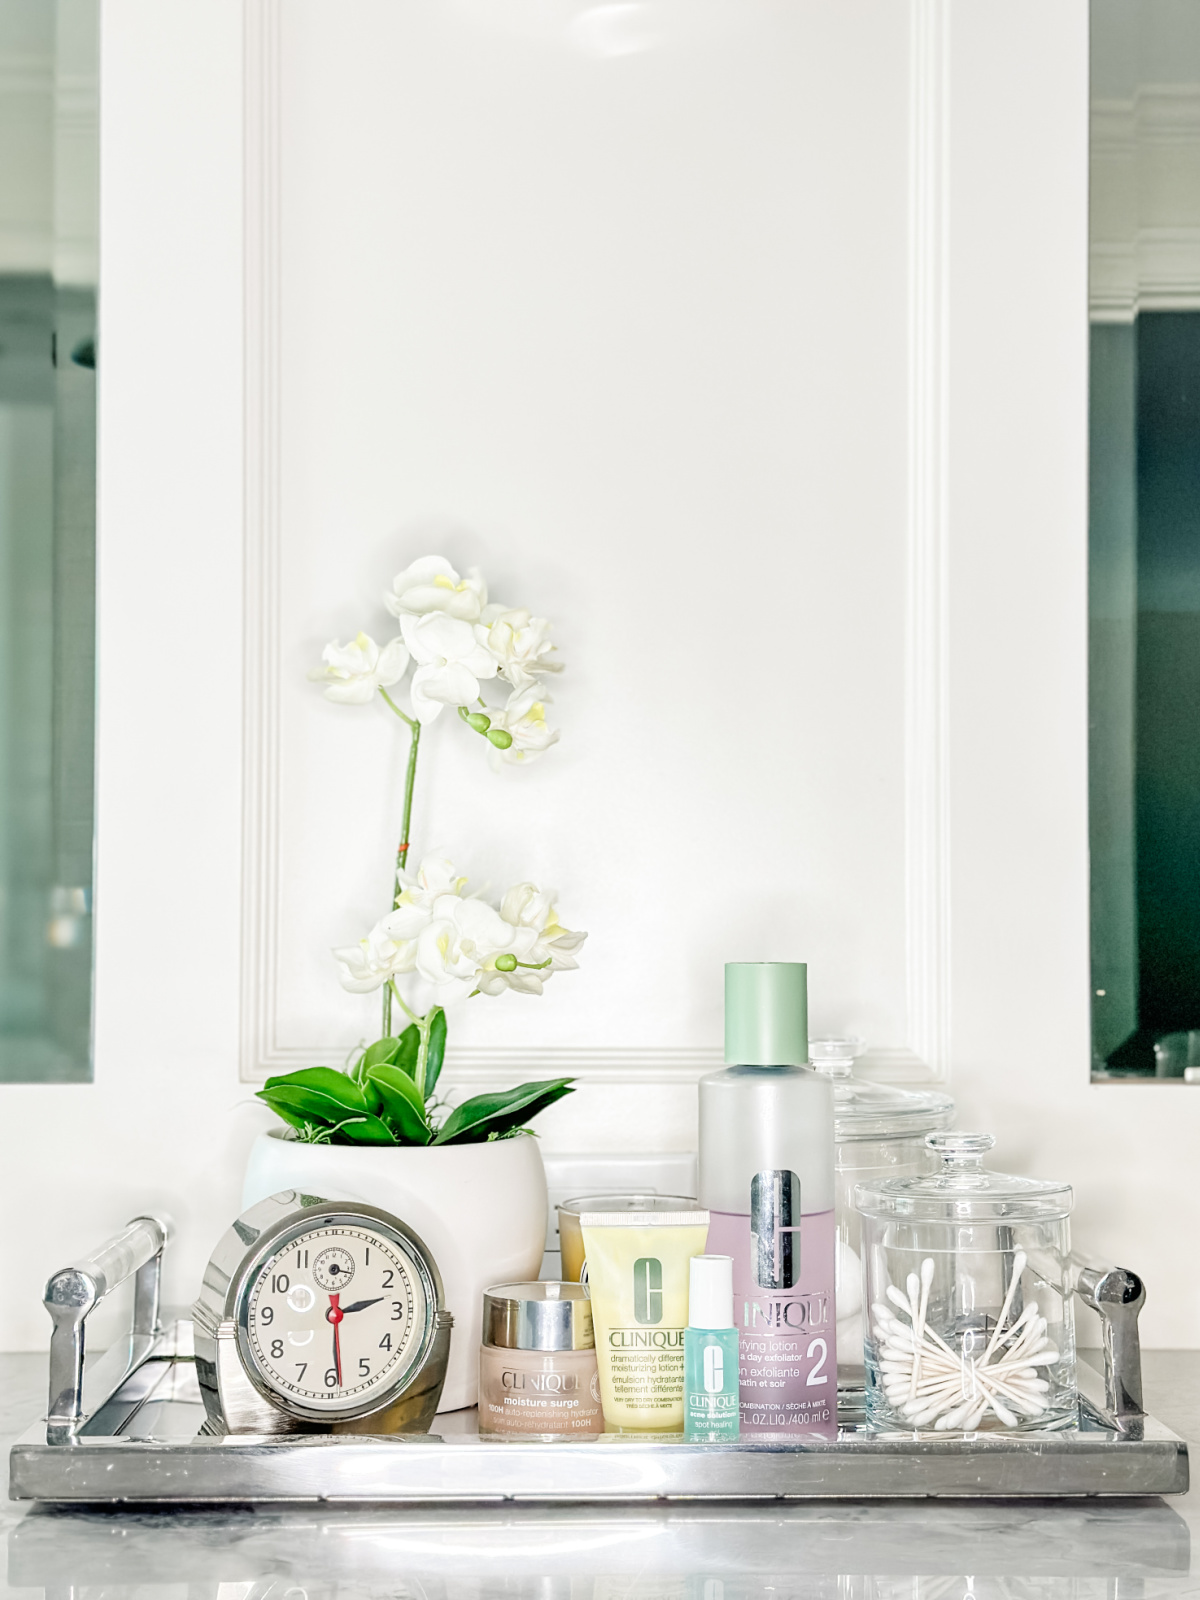 Bathroom vanity tray with Clinique skincare products.